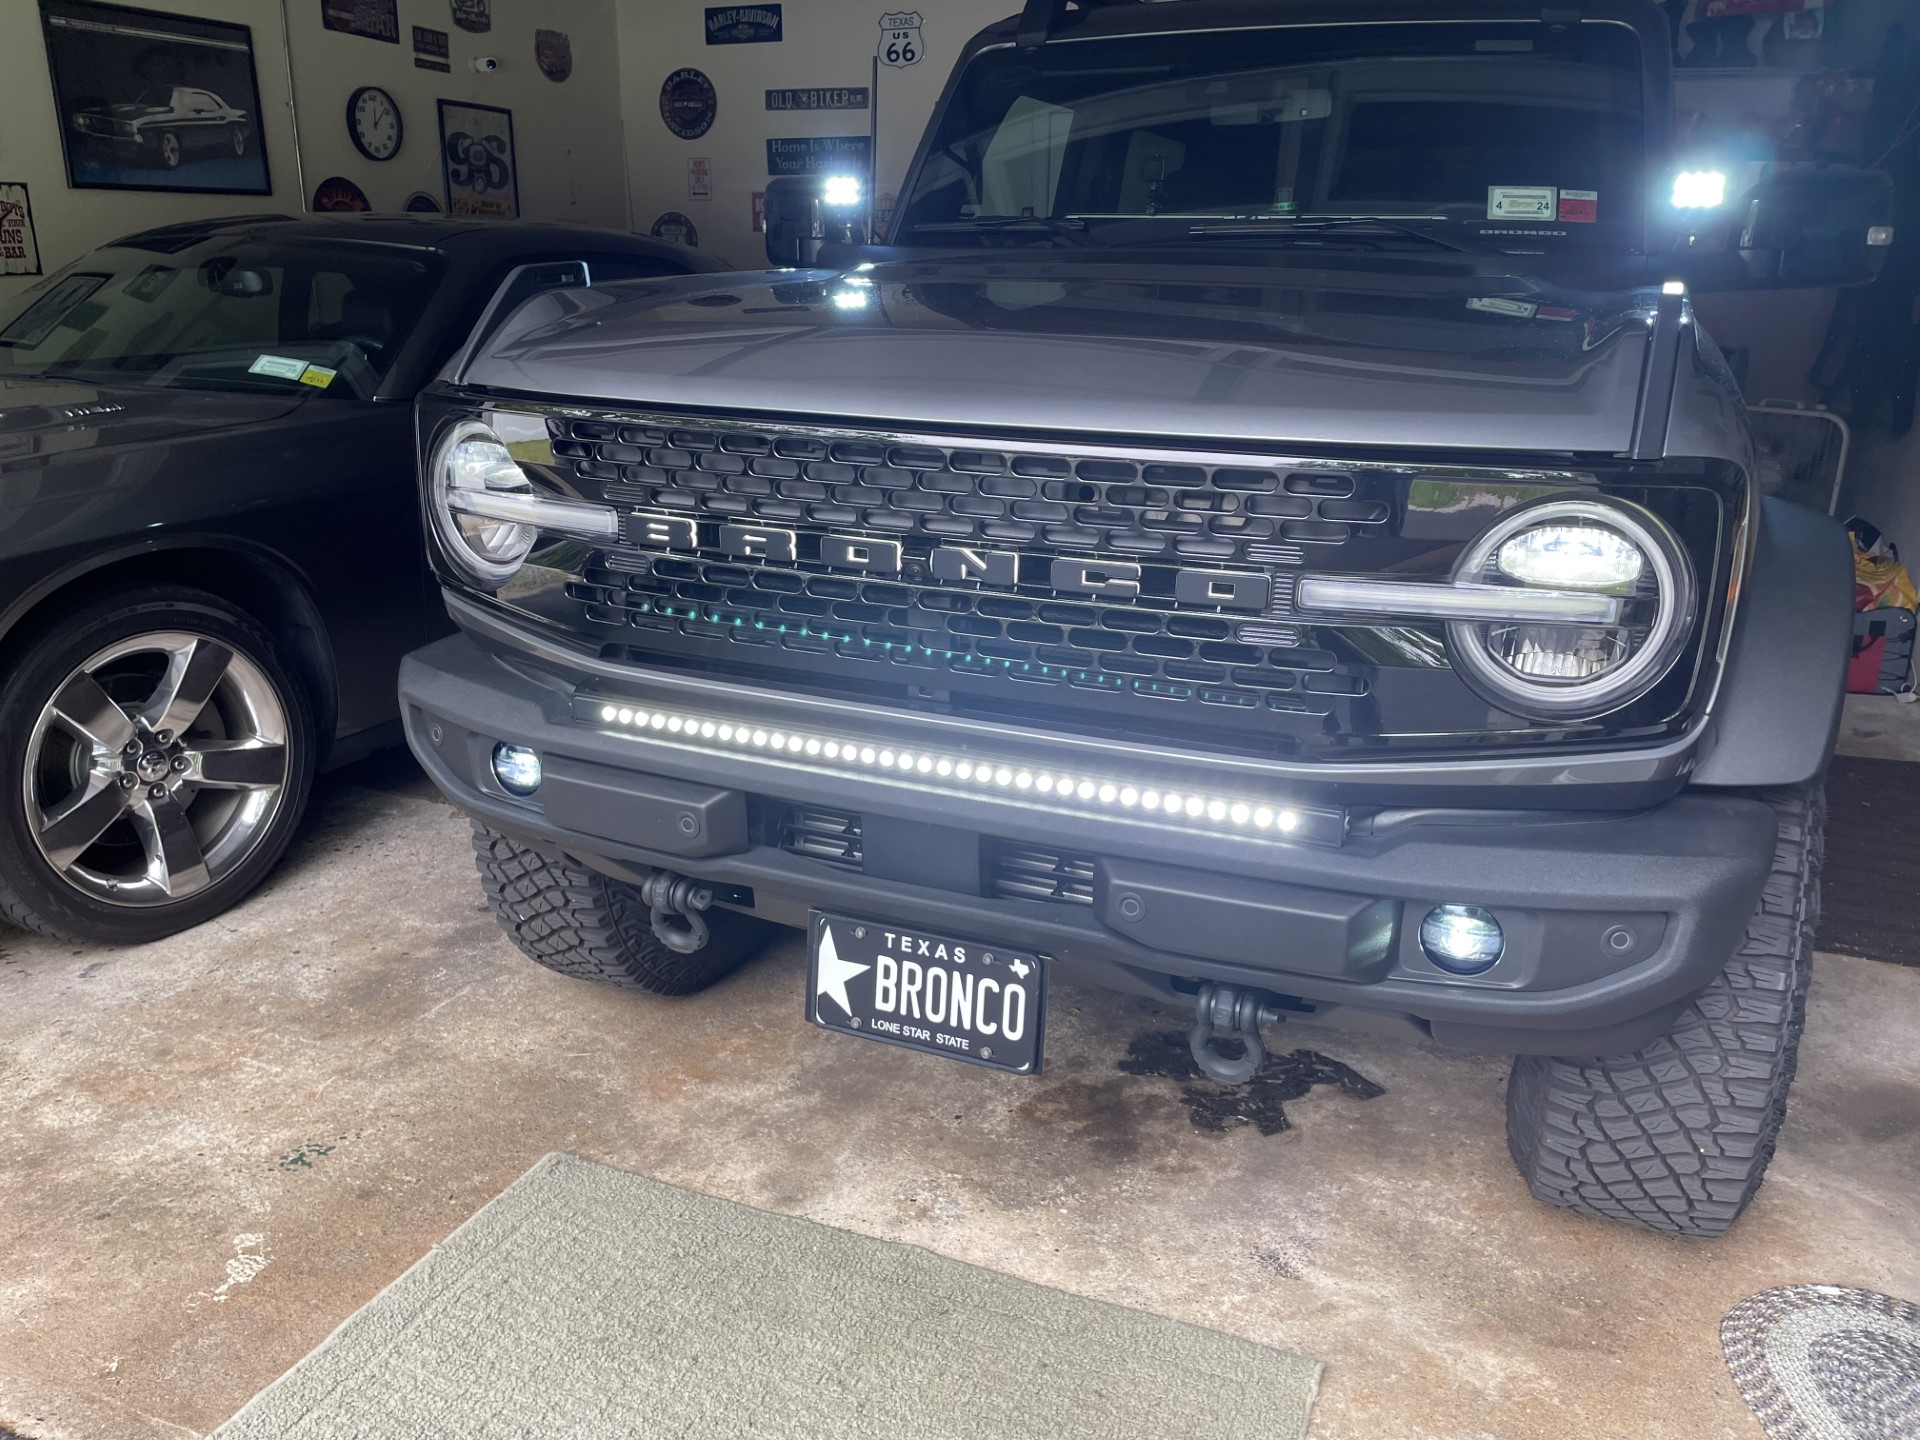 Ford Bronco getting high beam flashes when using low beams? Blue Lights On